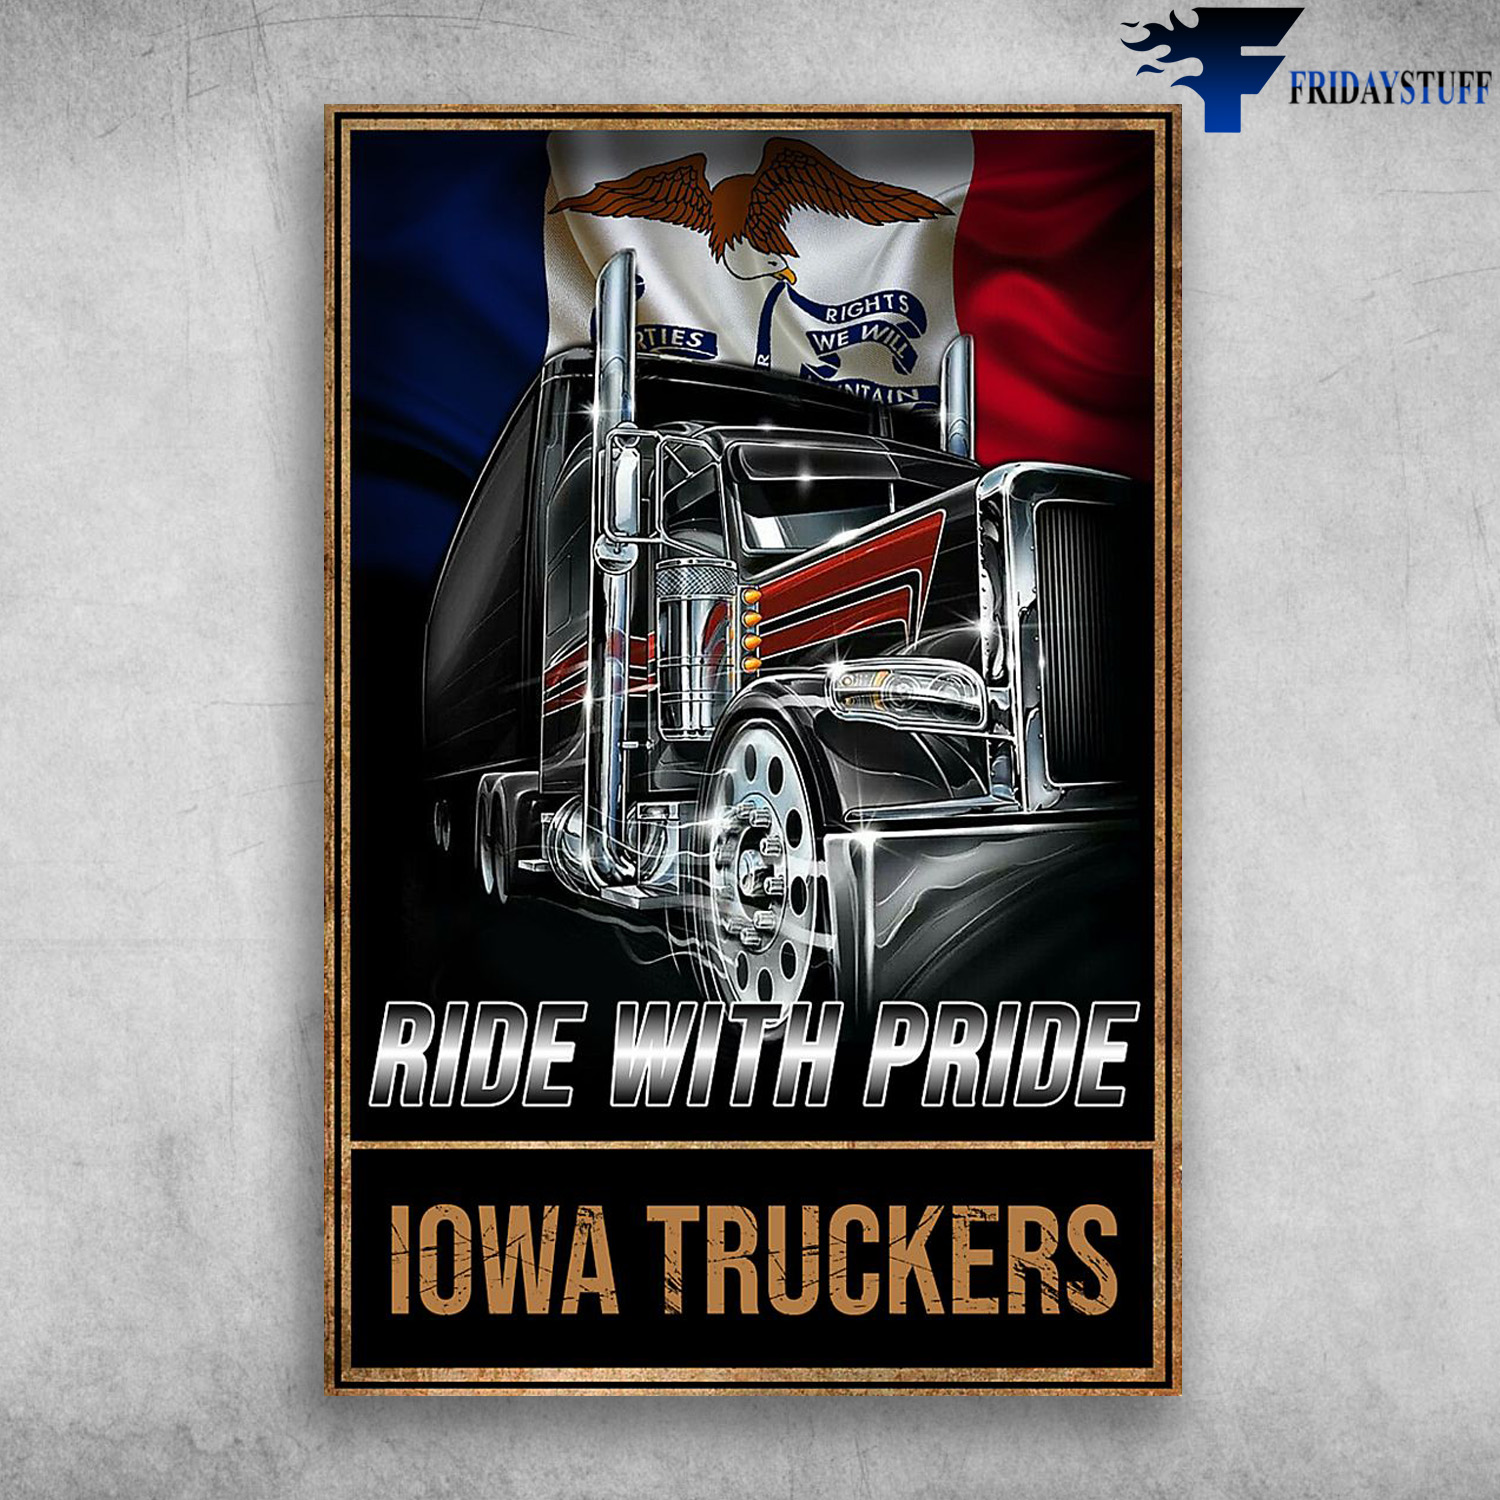 The Truck - Ride With Pride, Iowa Truckers